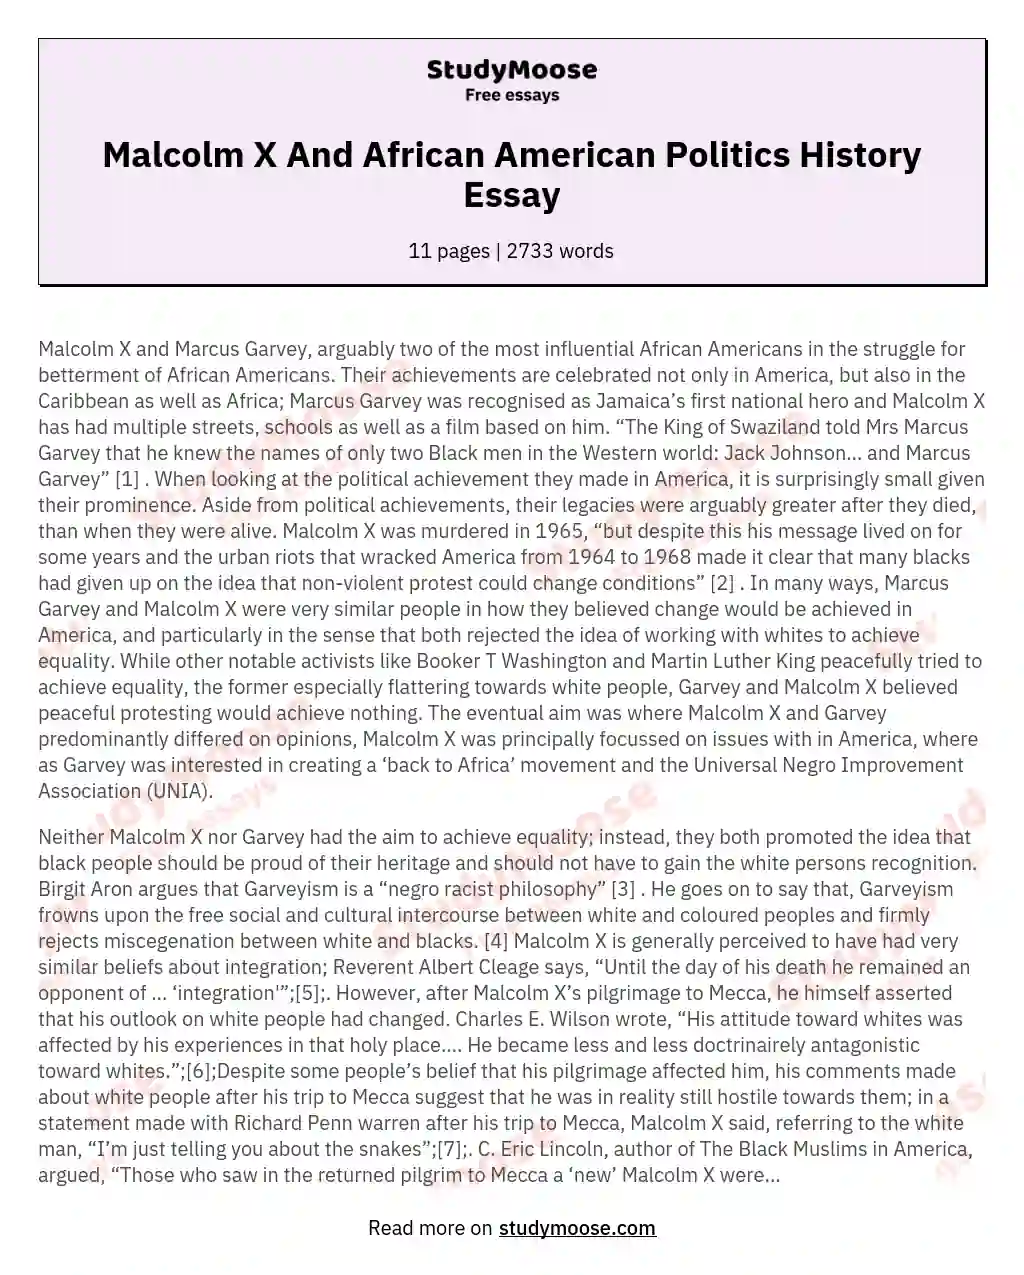 Malcolm X And African American Politics History Essay